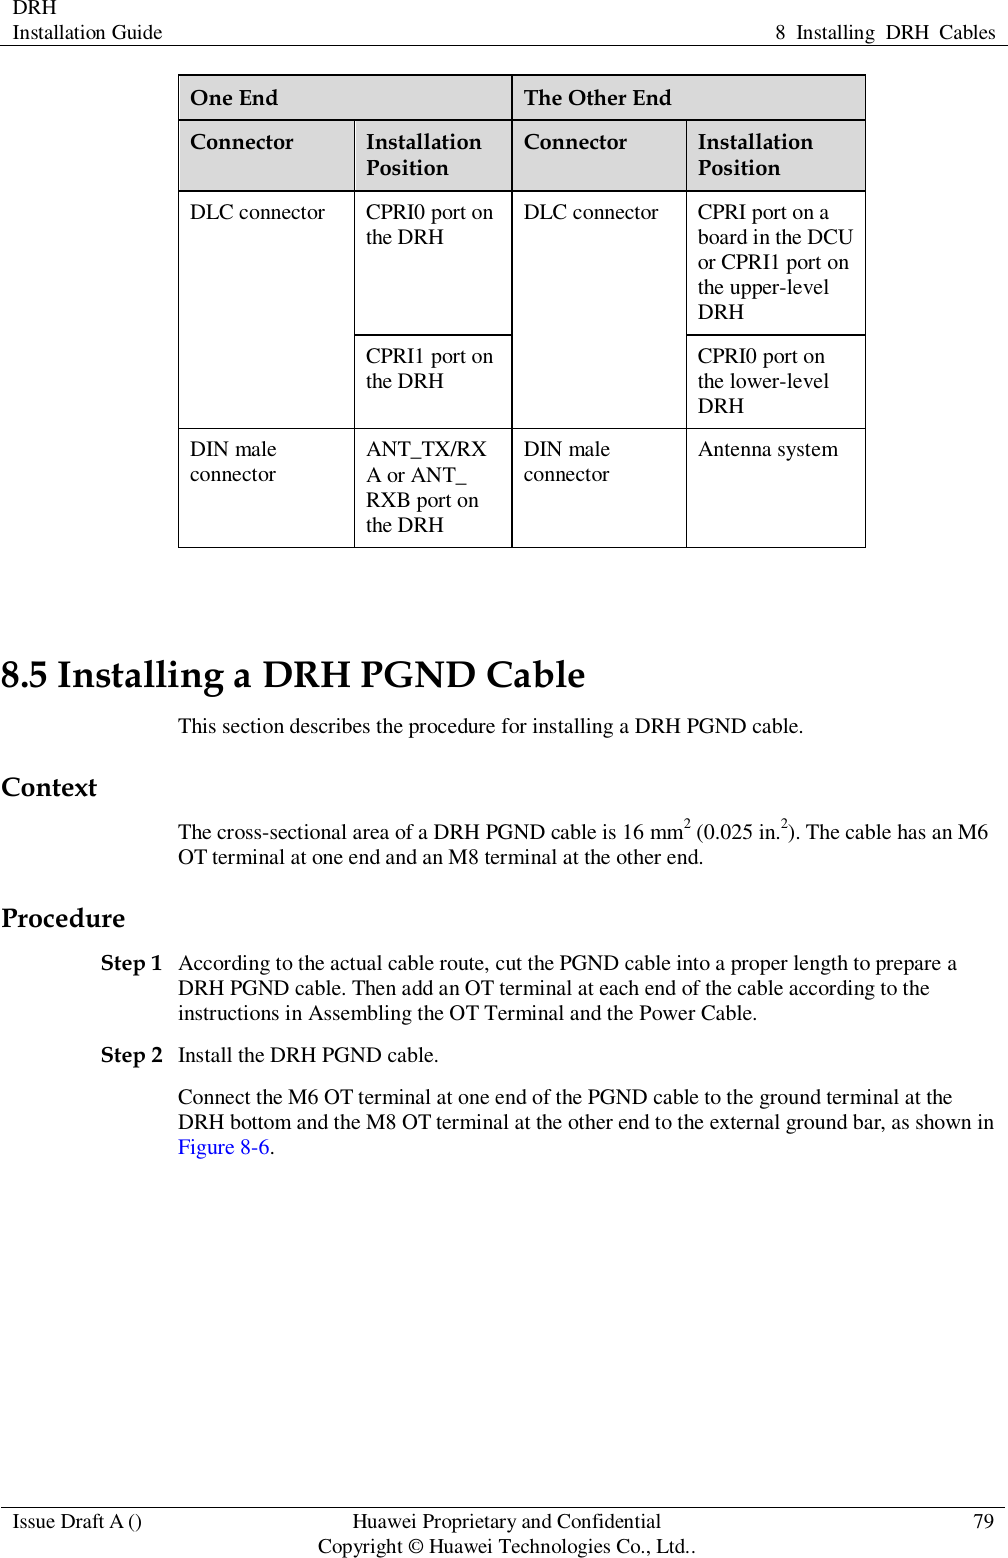 DRH   Installation Guide 8  Installing  DRH  Cables  Issue Draft A () Huawei Proprietary and Confidential                                     Copyright © Huawei Technologies Co., Ltd.. 79  One End The Other End Connector Installation Position Connector Installation Position DLC connector CPRI0 port on the DRH DLC connector CPRI port on a board in the DCU or CPRI1 port on the upper-level DRH CPRI1 port on the DRH CPRI0 port on the lower-level DRH DIN male connector ANT_TX/RXA or ANT_ RXB port on the DRH DIN male connector Antenna system  8.5 Installing a DRH PGND Cable This section describes the procedure for installing a DRH PGND cable. Context The cross-sectional area of a DRH PGND cable is 16 mm2 (0.025 in.2). The cable has an M6 OT terminal at one end and an M8 terminal at the other end. Procedure Step 1 According to the actual cable route, cut the PGND cable into a proper length to prepare a DRH PGND cable. Then add an OT terminal at each end of the cable according to the instructions in Assembling the OT Terminal and the Power Cable. Step 2 Install the DRH PGND cable. Connect the M6 OT terminal at one end of the PGND cable to the ground terminal at the DRH bottom and the M8 OT terminal at the other end to the external ground bar, as shown in Figure 8-6.   